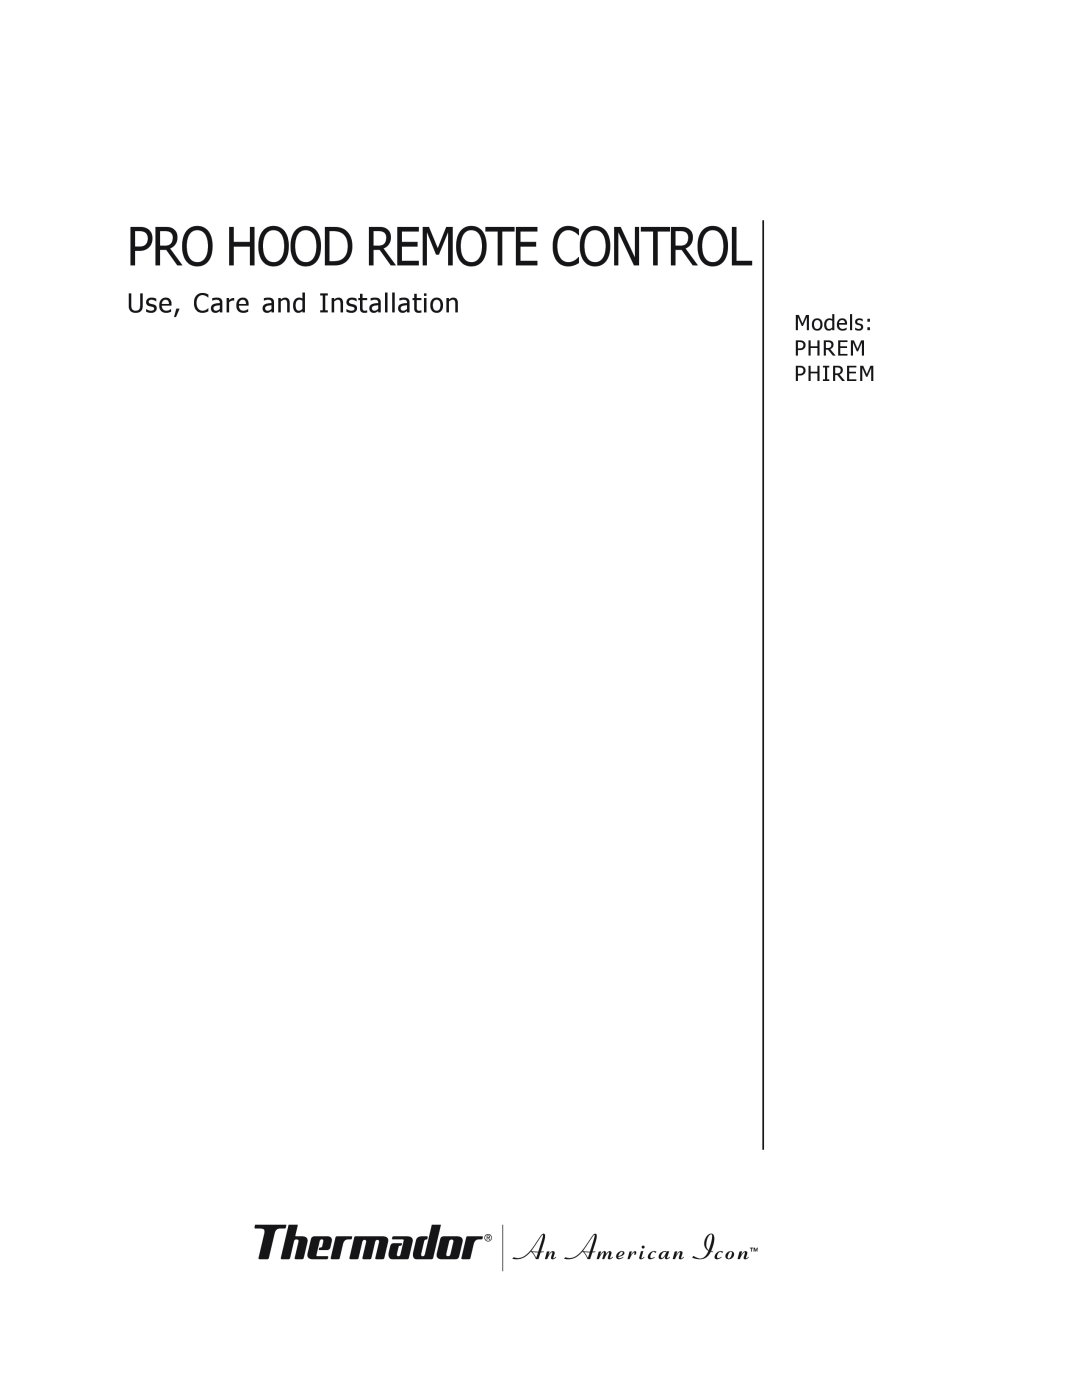 Thermador manual Pro Hood Remote Control, Use, Care and Installation, Models PHREM PHIREM 